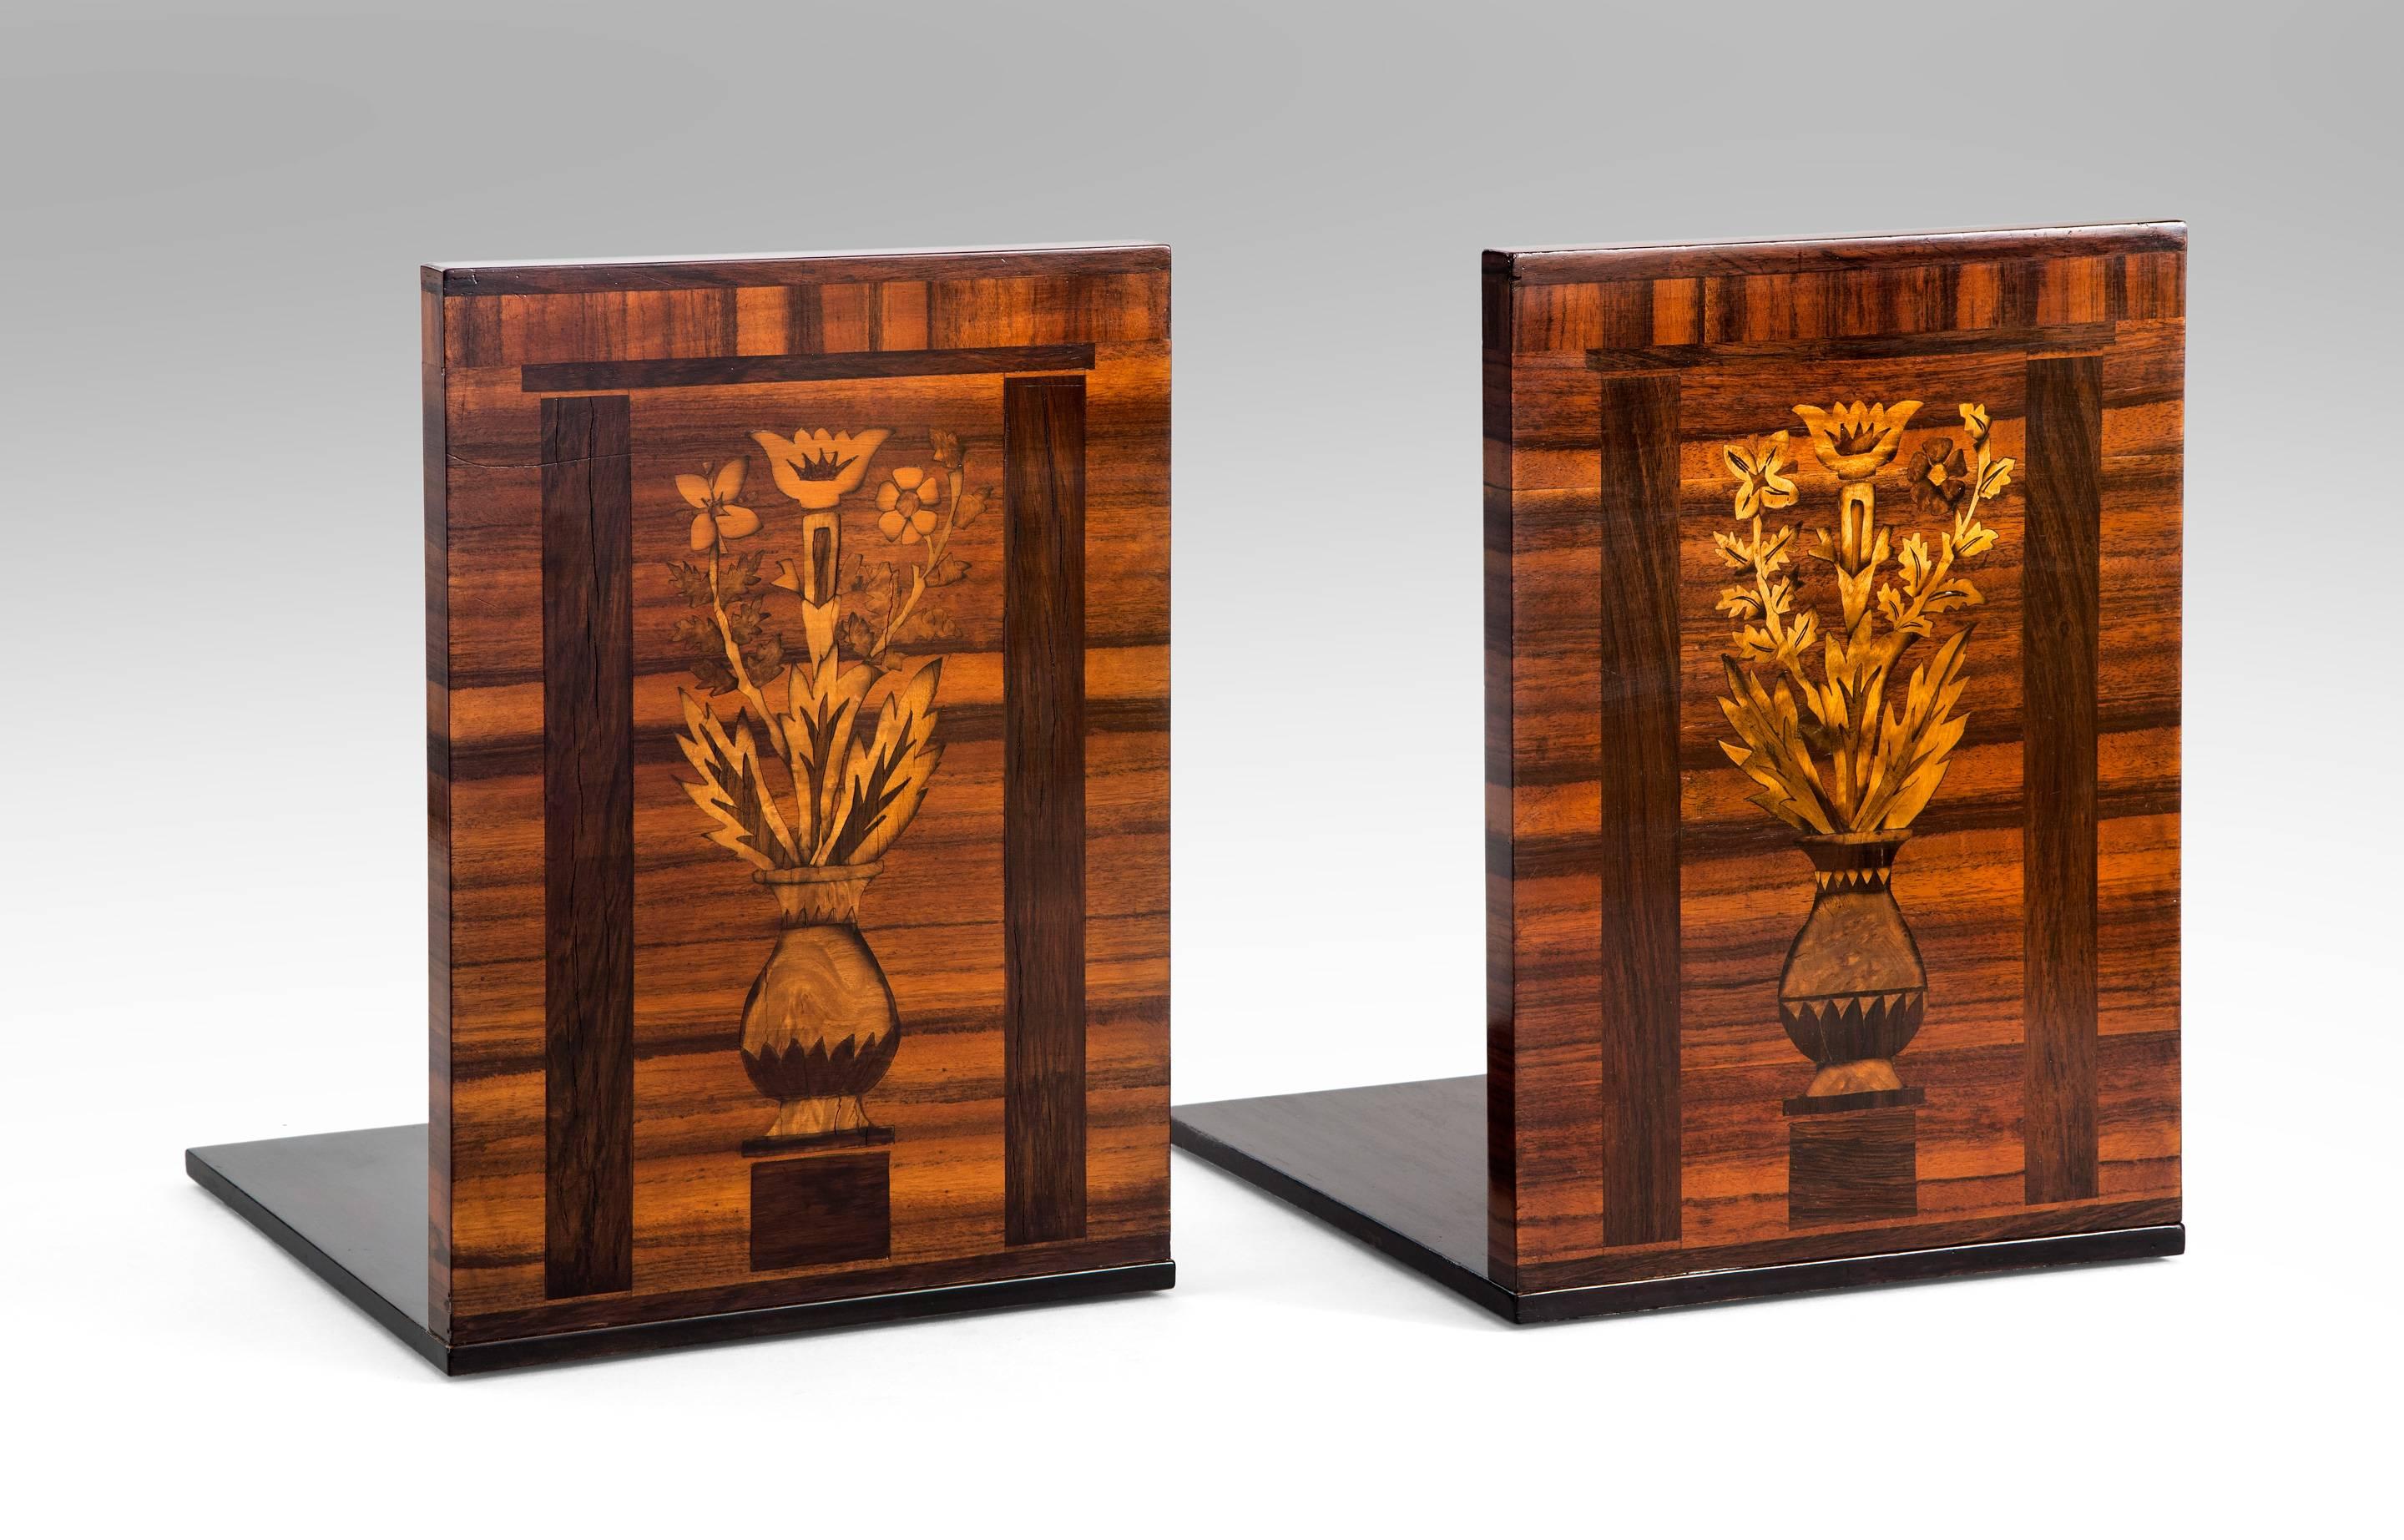 The rectangular reserve depicting a marquetry bouquet in an urn, against a rosewood and macassar architectural background.  

Very good condition, expertly restored and ready to add to your collection.